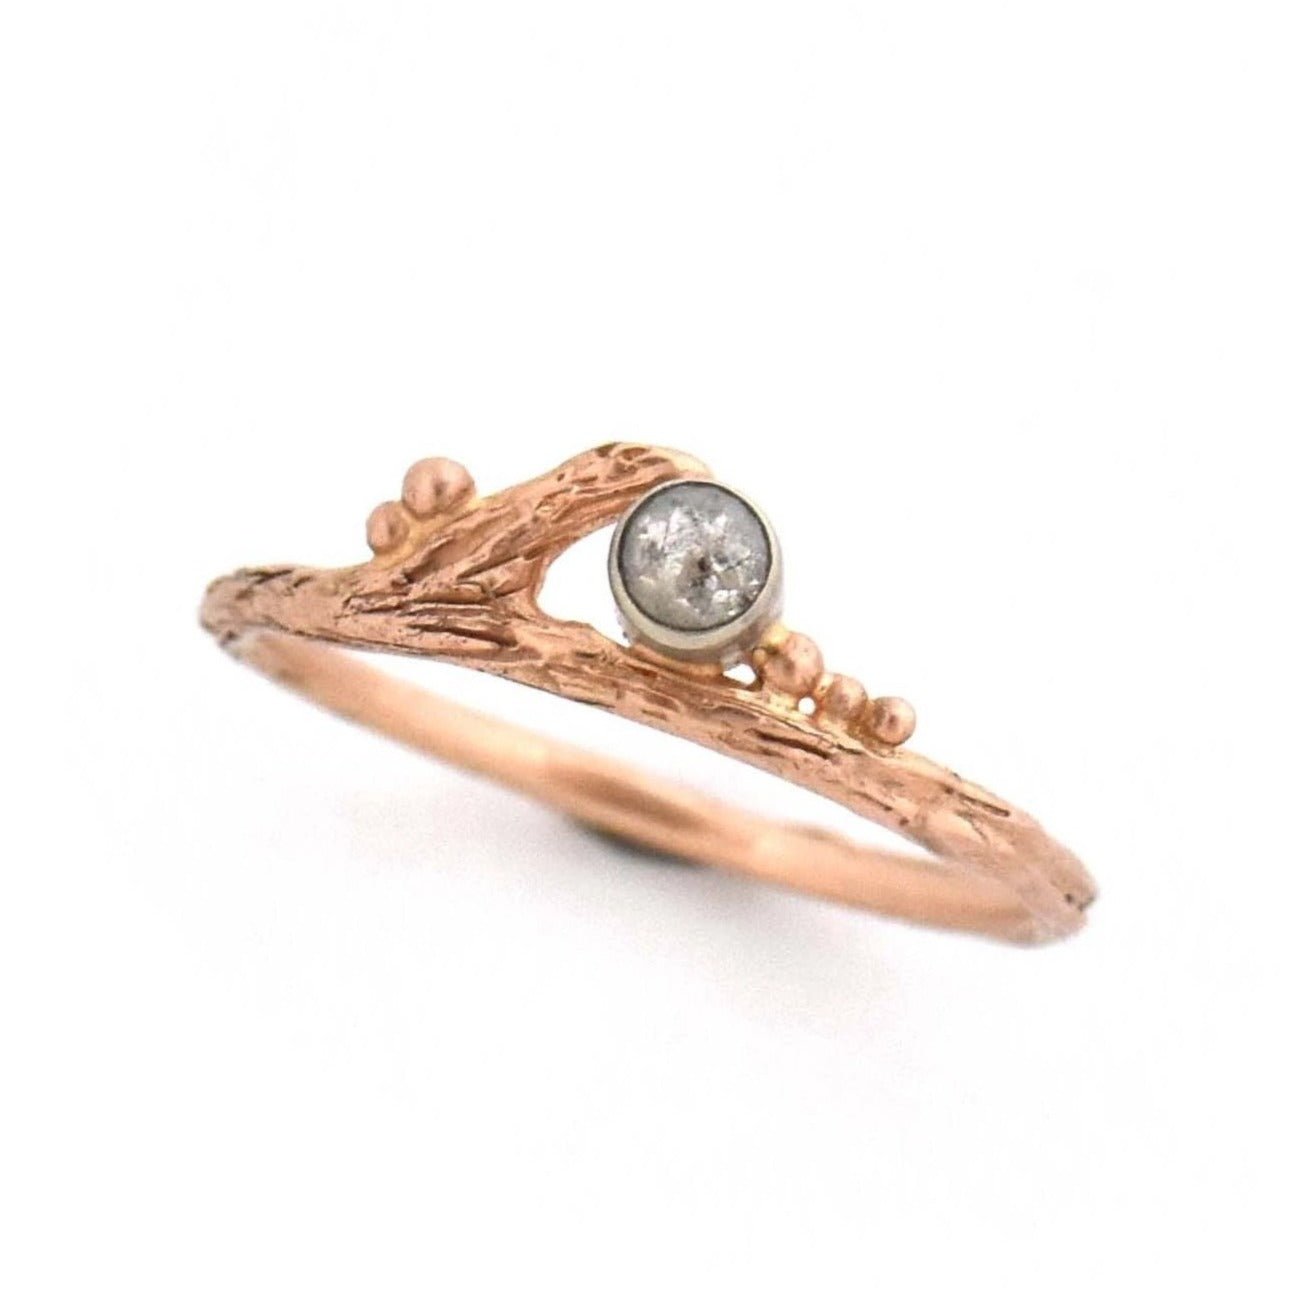 Gold Enchanted Rustic Diamond Twig Ring - your choice of gold - Wedding Ring 14K Yellow Gold / Rustic Diamond 14K Rose Gold / Rustic Diamond 3449 - handmade by Beth Millner Jewelry